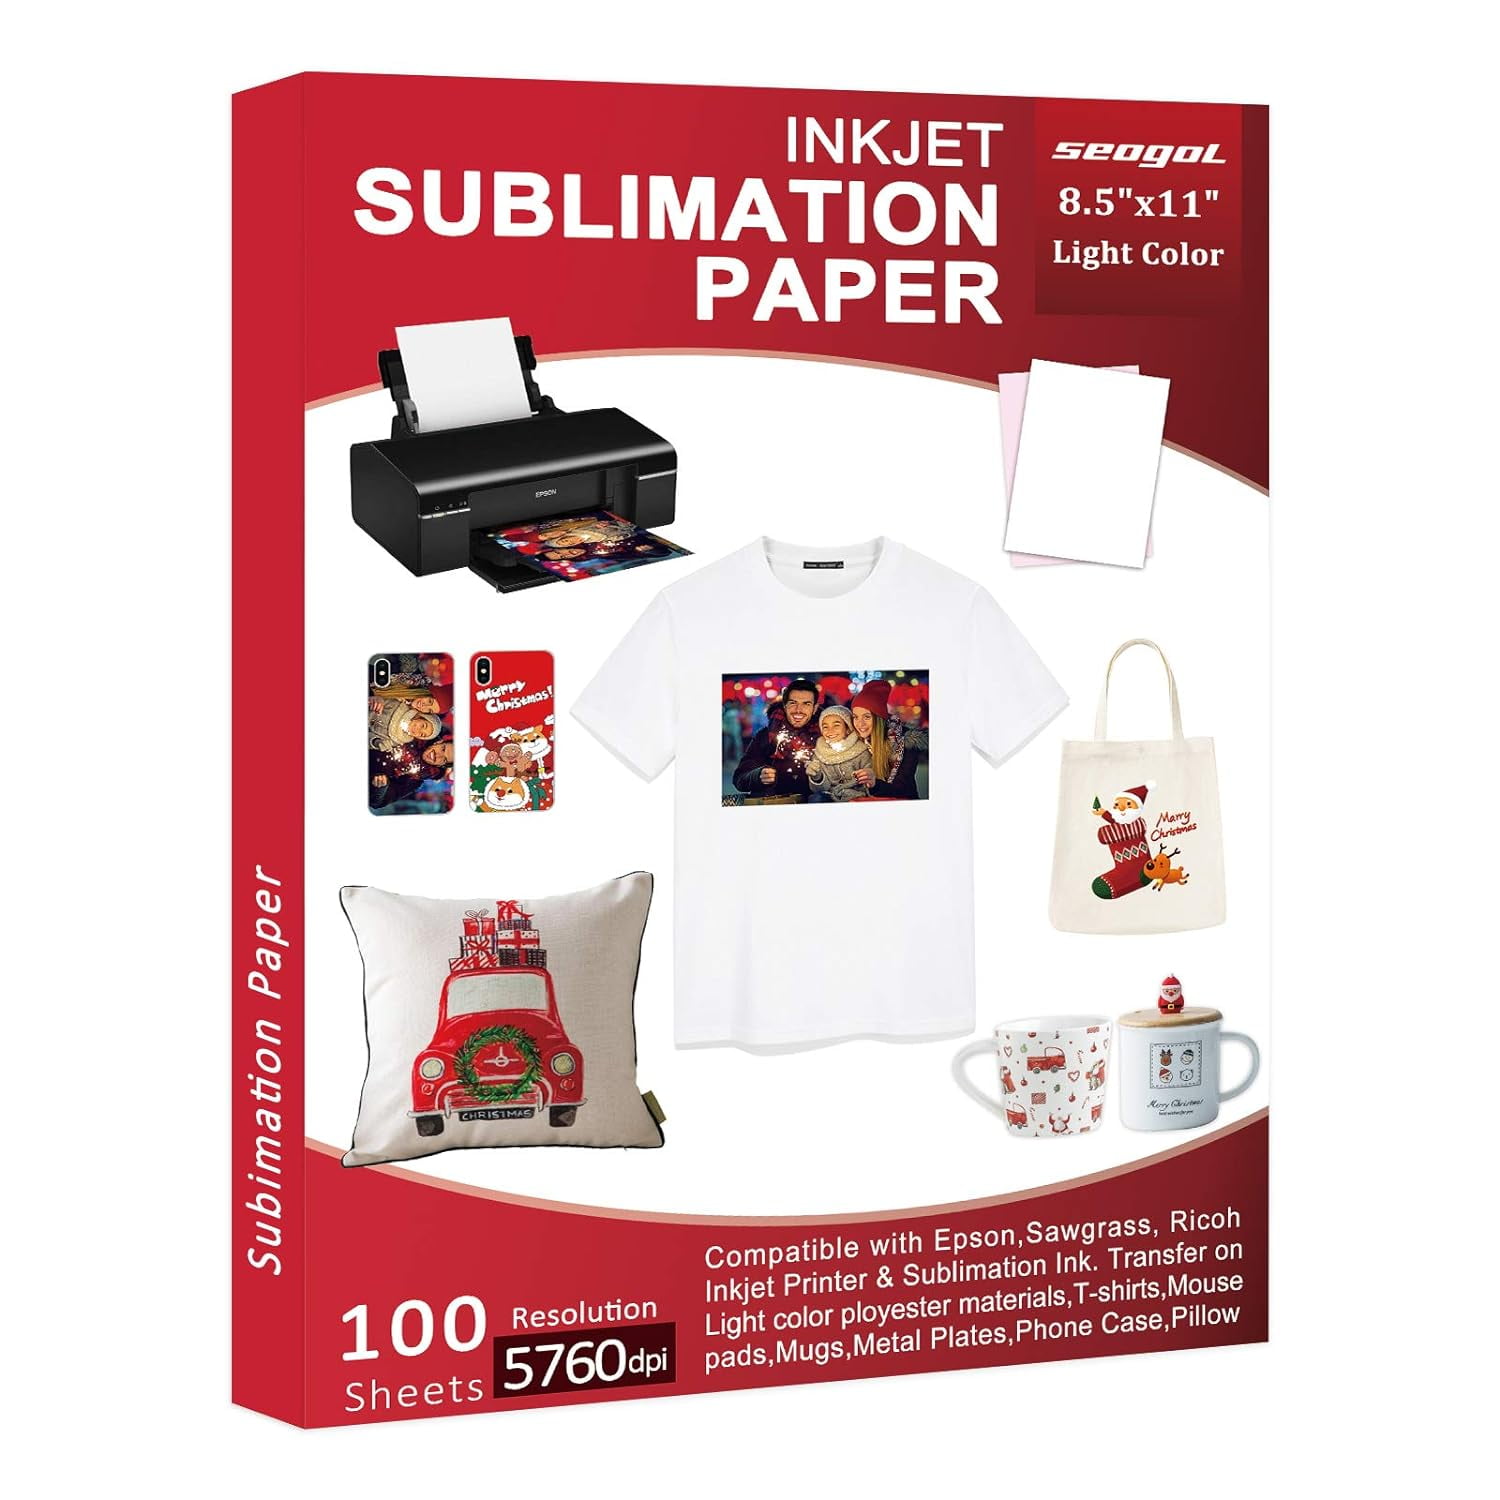 S-RACE Sublimation Paper 11x17 inch 100 Sheets - for Any Dye Sublimation Printer, Ideal for T-Shirt, Light Fabric DIY Gift